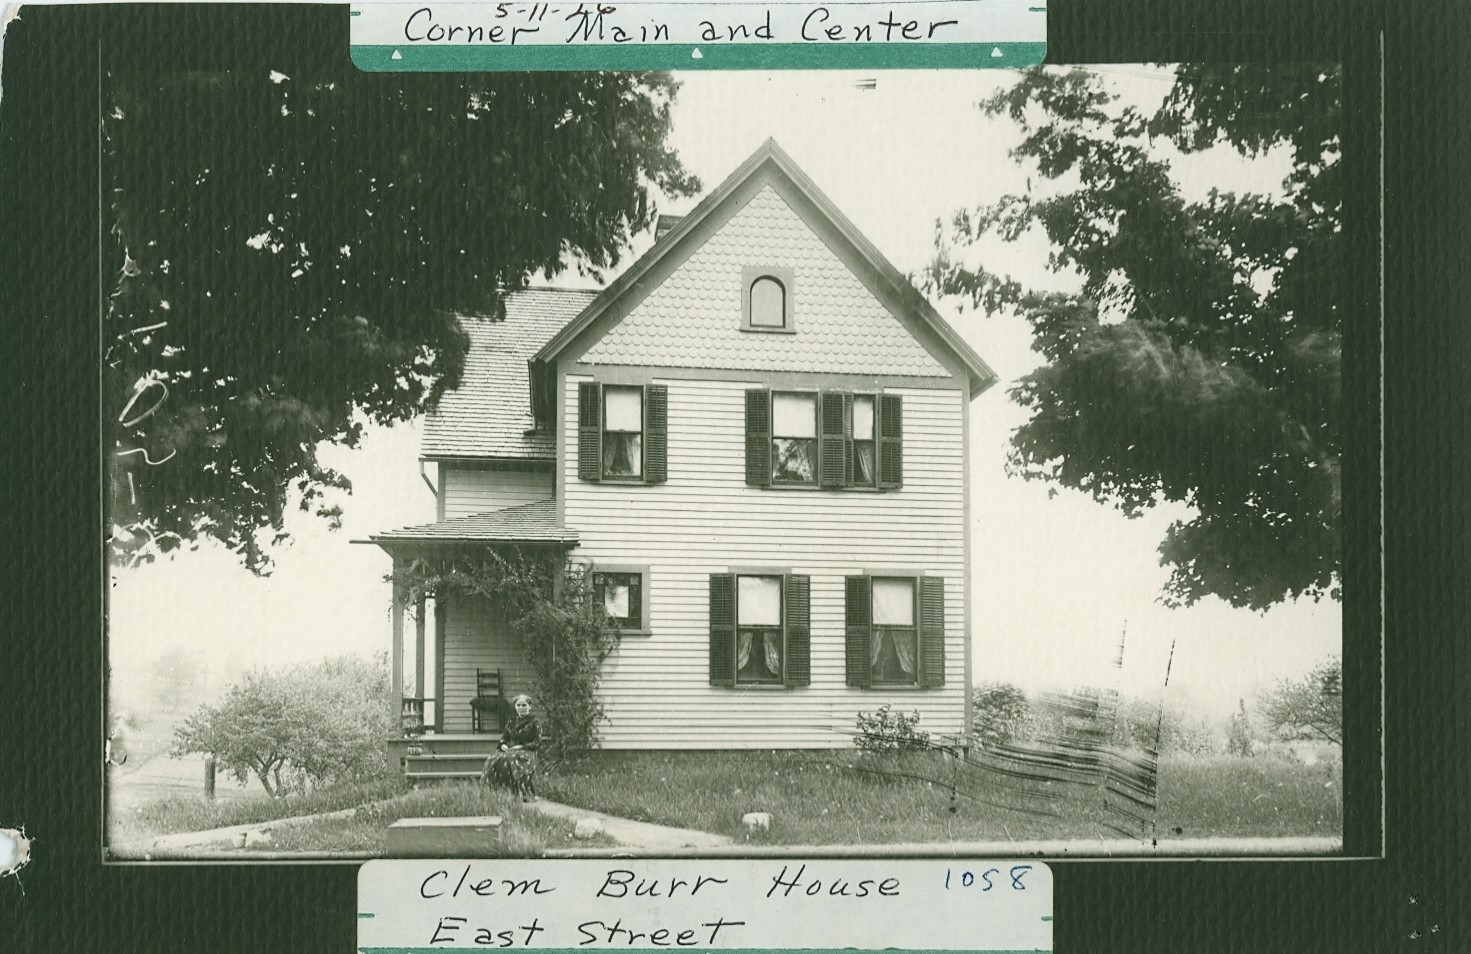 Clement R. and Mary Burr - East St.